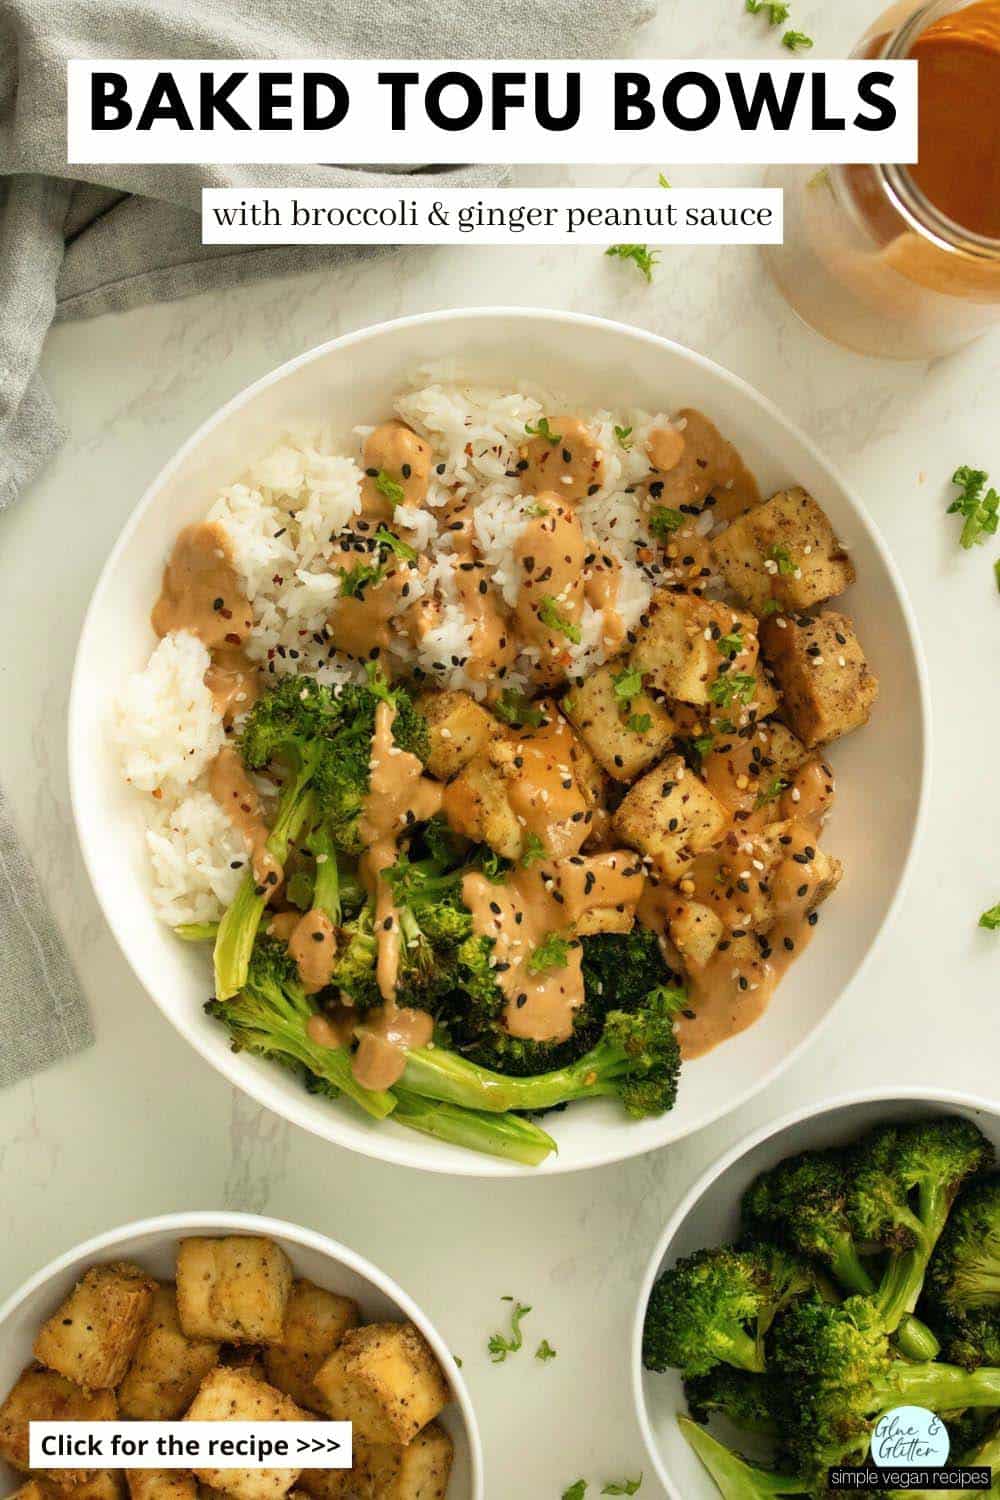 baked tofu in peanut sauce in a white bowl with rice, bowls of tofu and broccoli and a jar of more sauce on the side, text overlay